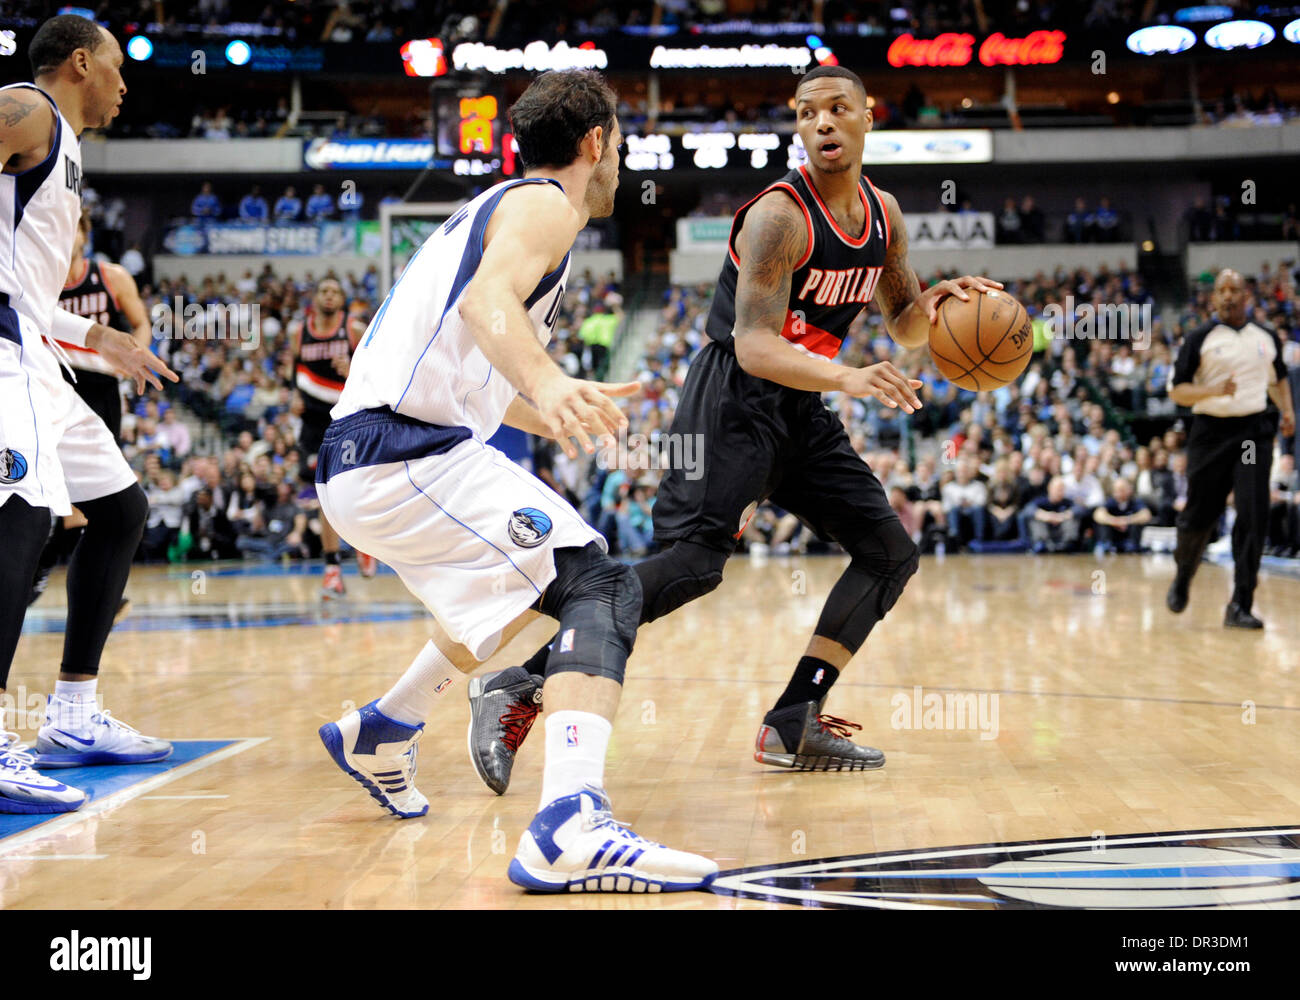 Jan 18, 2014: Portland Trail Blazers point guard Damian Lillard #0 during an NBA game between the Portland Trail Blazers and the Dallas Mavericks at the American Airlines Center in Dallas, TX Portland defeated Dallas 127-111 Stock Photo